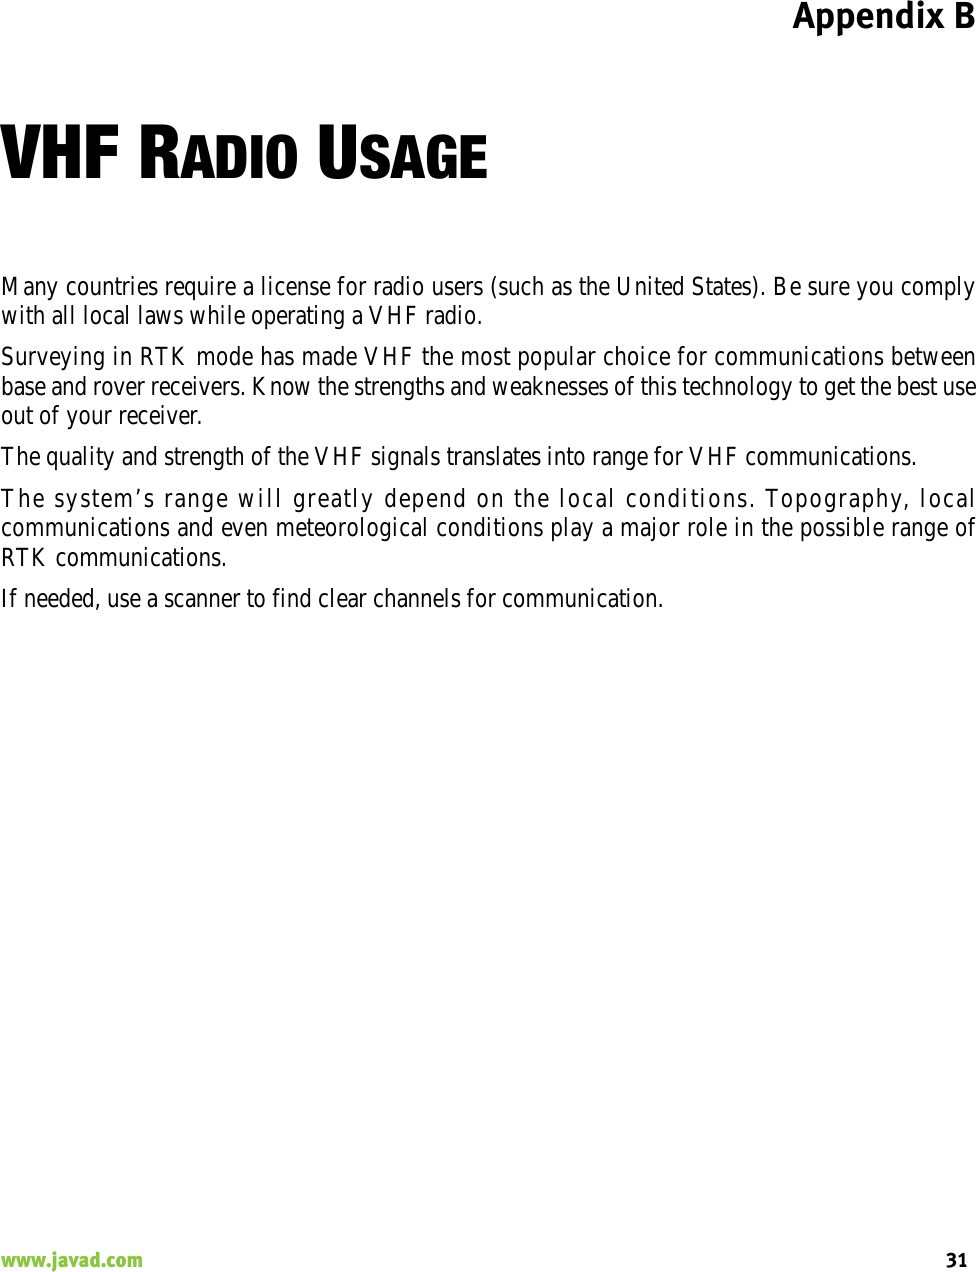 Appendix B31www.javad.com                                                                                                                                                    VHF RADIO USAGEMany countries require a license for radio users (such as the United States). Be sure you complywith all local laws while operating a VHF radio.Surveying in RTK mode has made VHF the most popular choice for communications betweenbase and rover receivers. Know the strengths and weaknesses of this technology to get the best useout of your receiver.The quality and strength of the VHF signals translates into range for VHF communications.The system’s range will greatly depend on the local conditions. Topography, localcommunications and even meteorological conditions play a major role in the possible range ofRTK communications.If needed, use a scanner to find clear channels for communication.